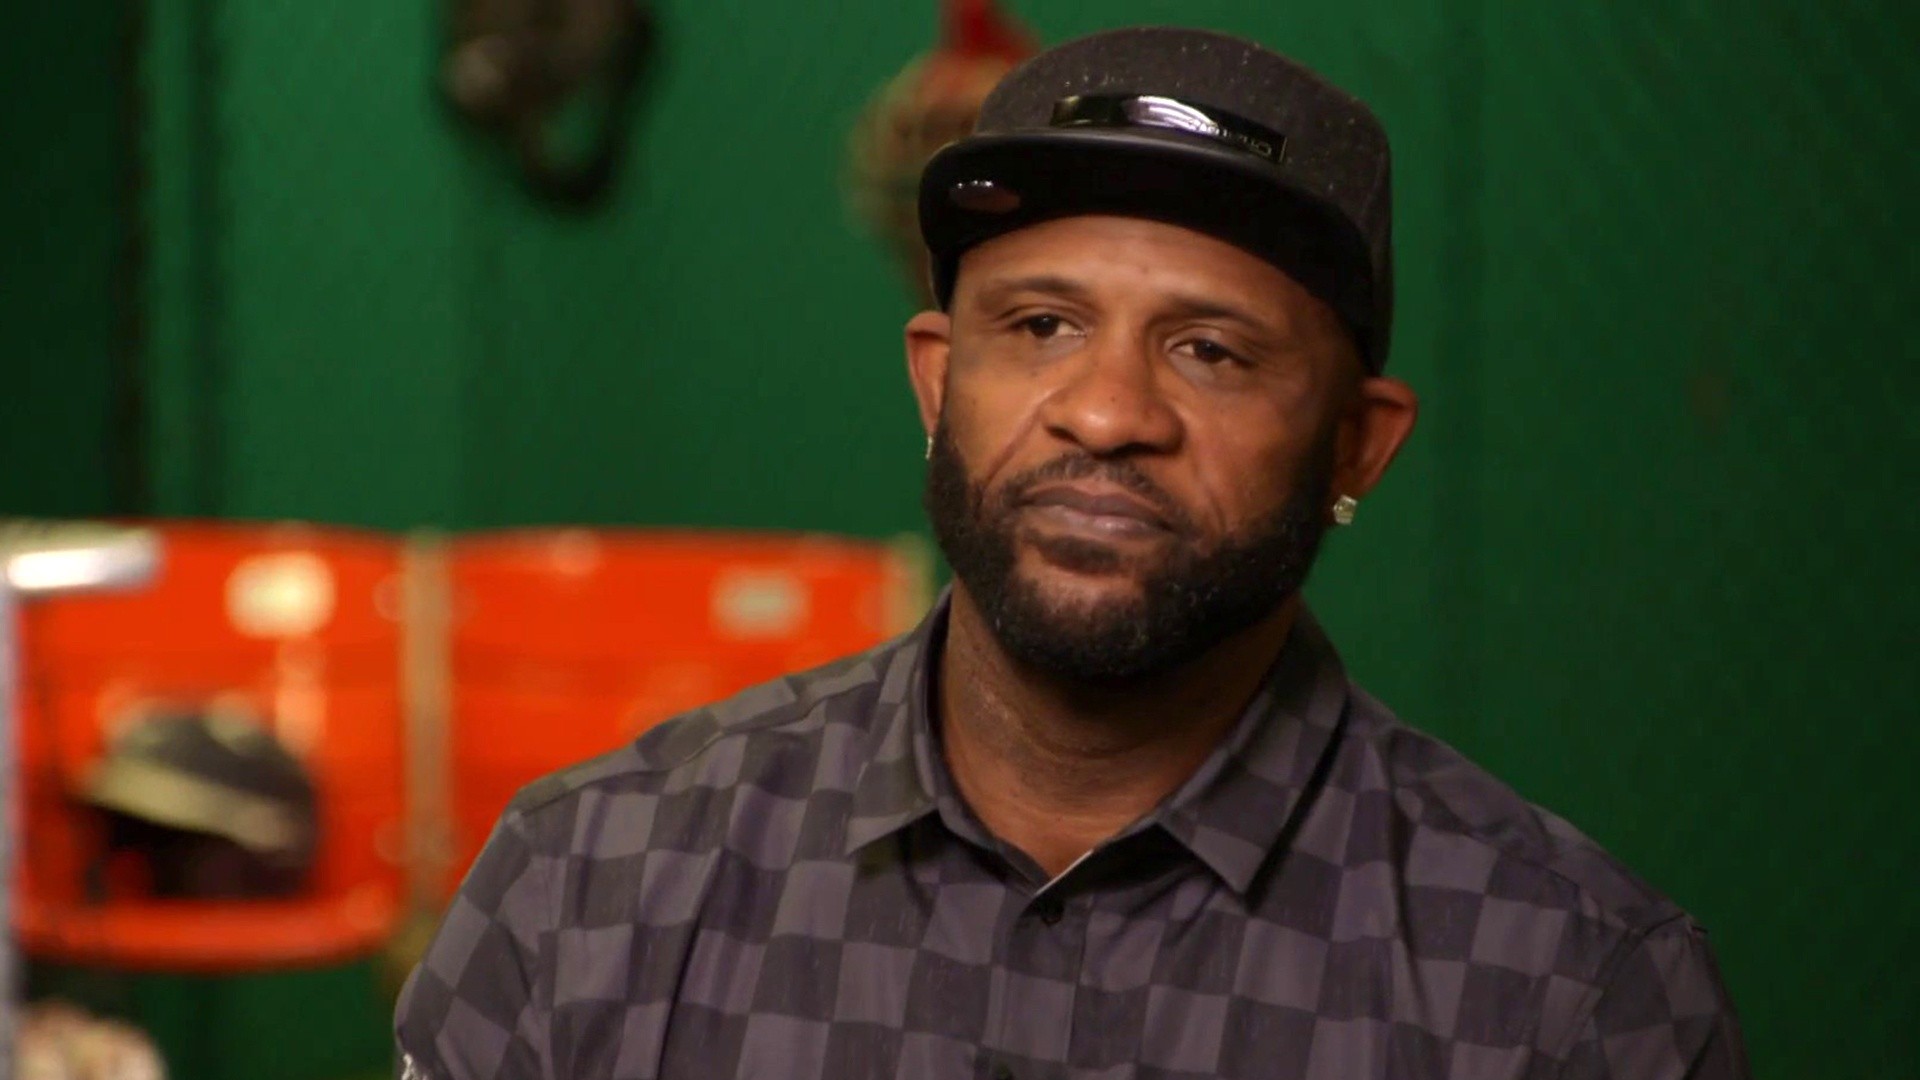 Baseball great CC Sabathia opens up about his alcohol struggles